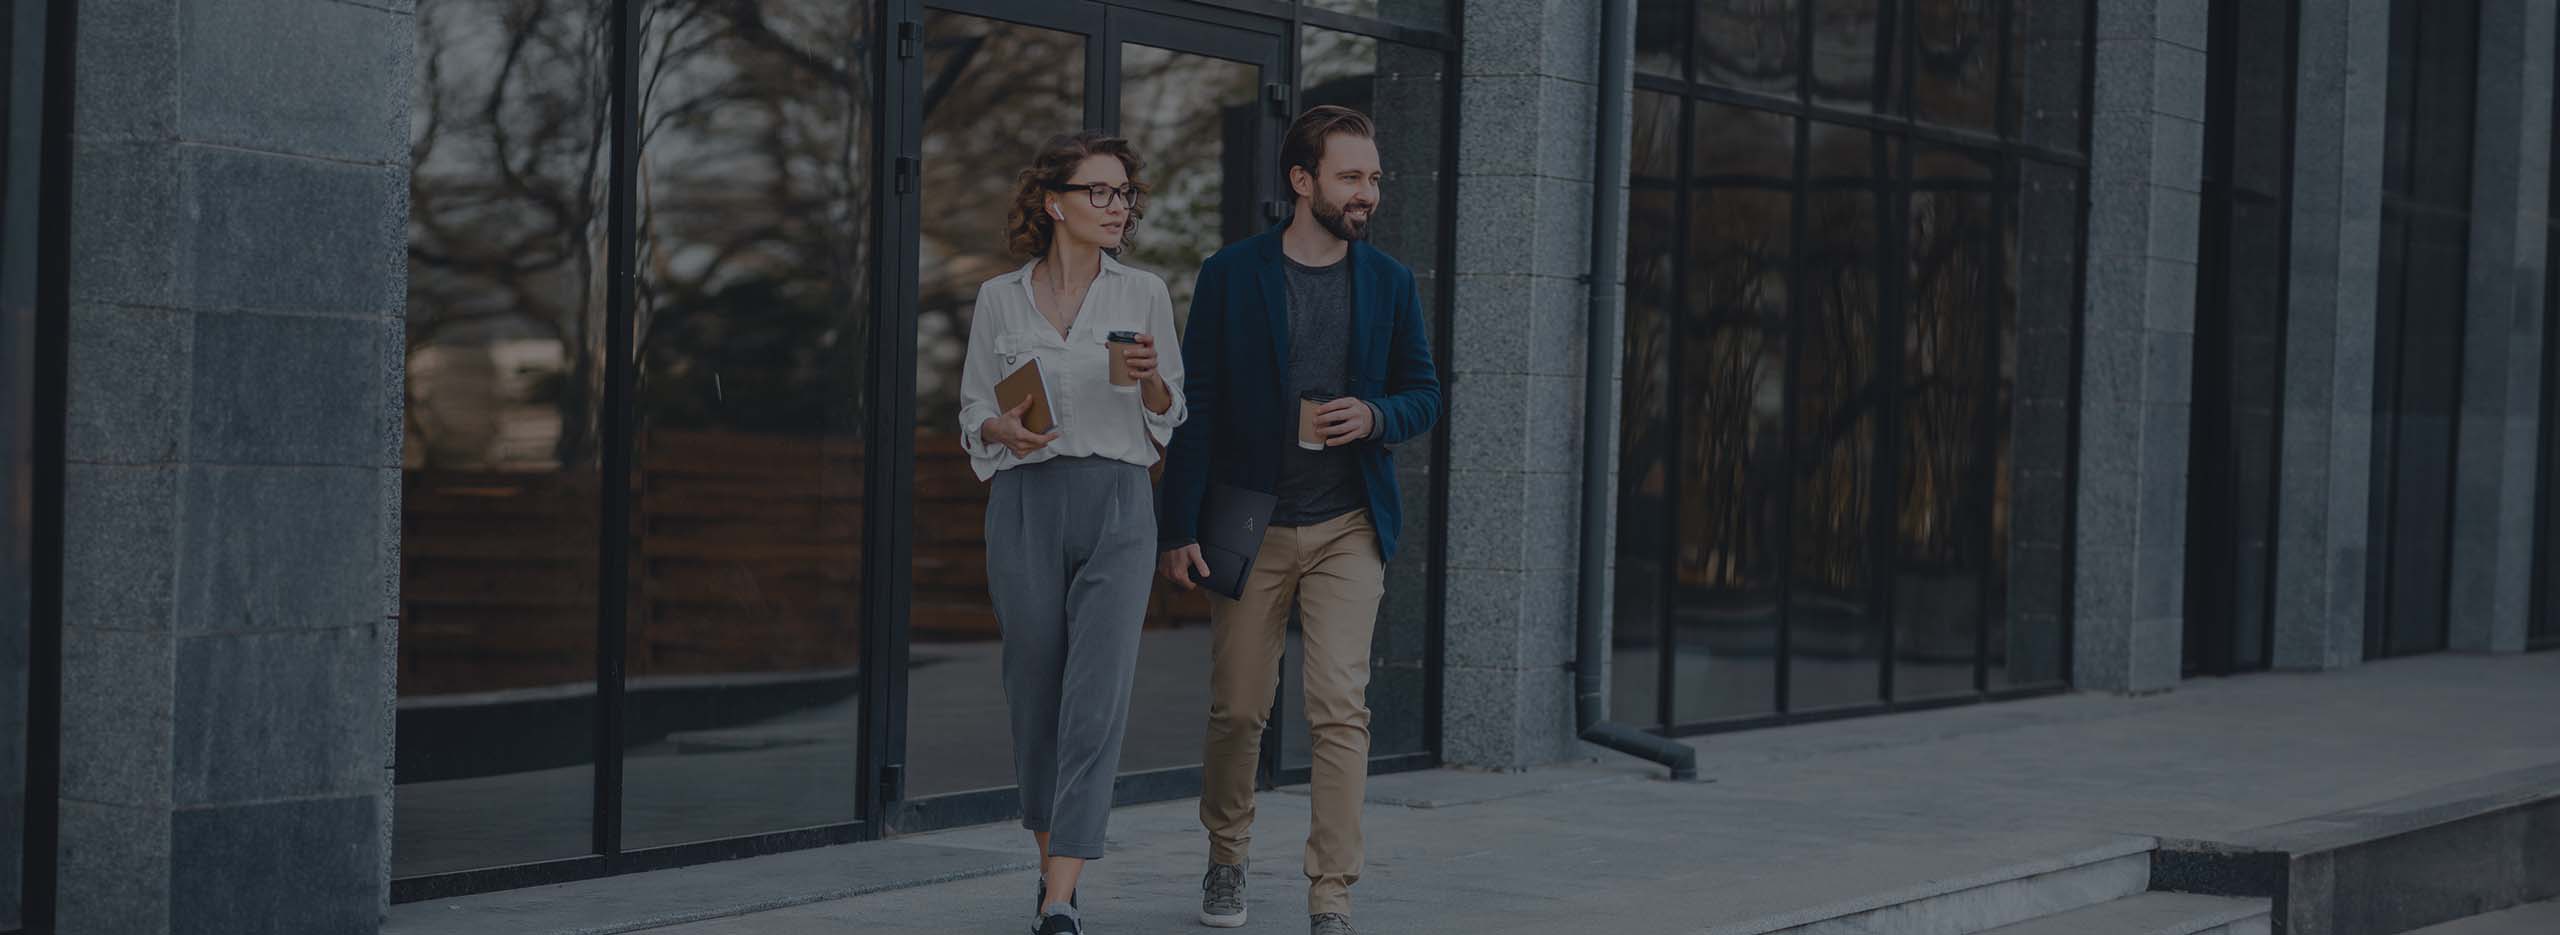 ity scene, with two people heading to work, the man carries the ASUS ZenScreen portable monitor on his left hand effortlessly and holds a drink on his right hand